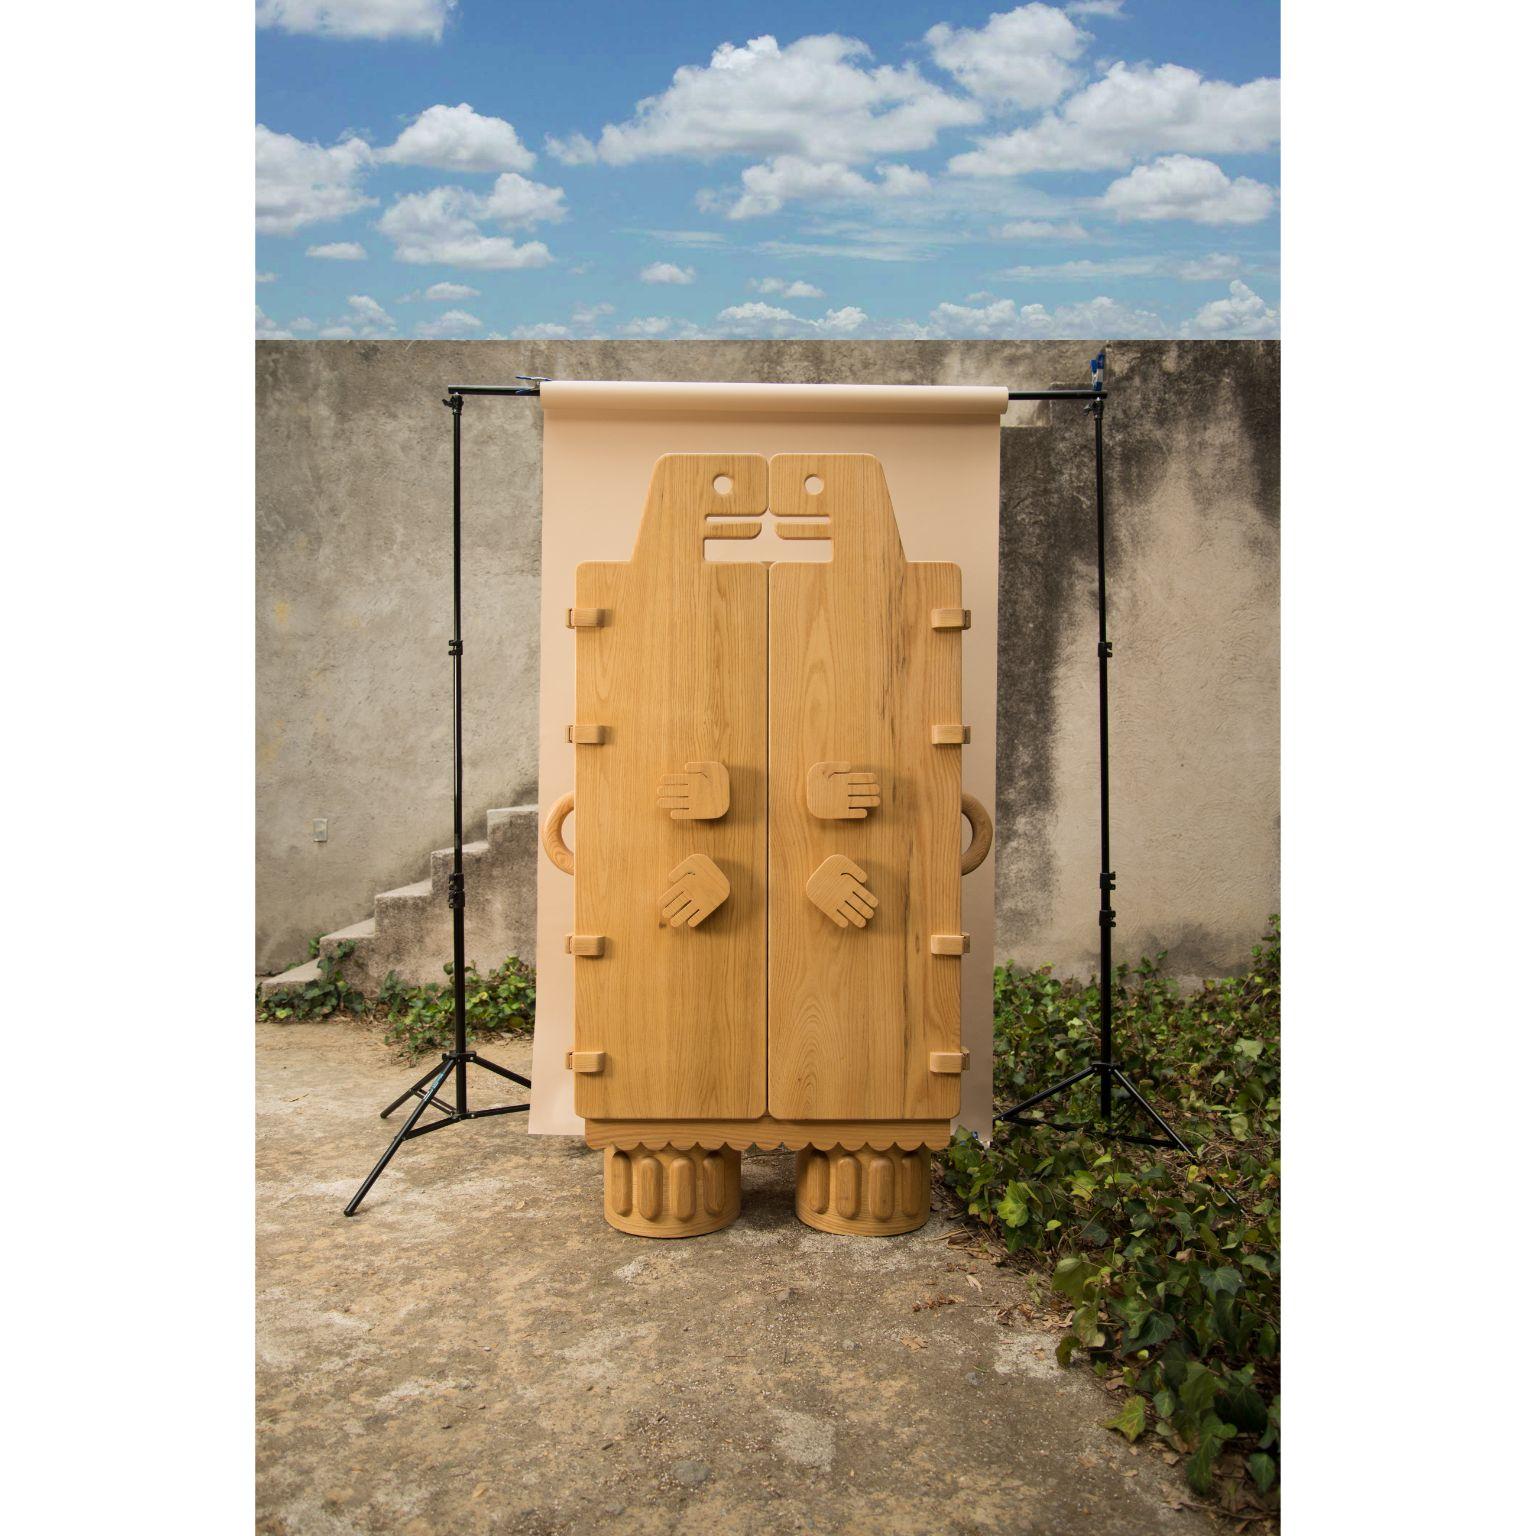 Coatlicue cabinet by Andres Gutierrez
Dimensions: D40 x W90 x H185 cm
Materials: Solid white oak wood.


— Inspired by the Aztec goddess of life and death, Coatlicue, ‘The One Who
Has A Serpent Skirt’—
Friendly shaped wood en representation